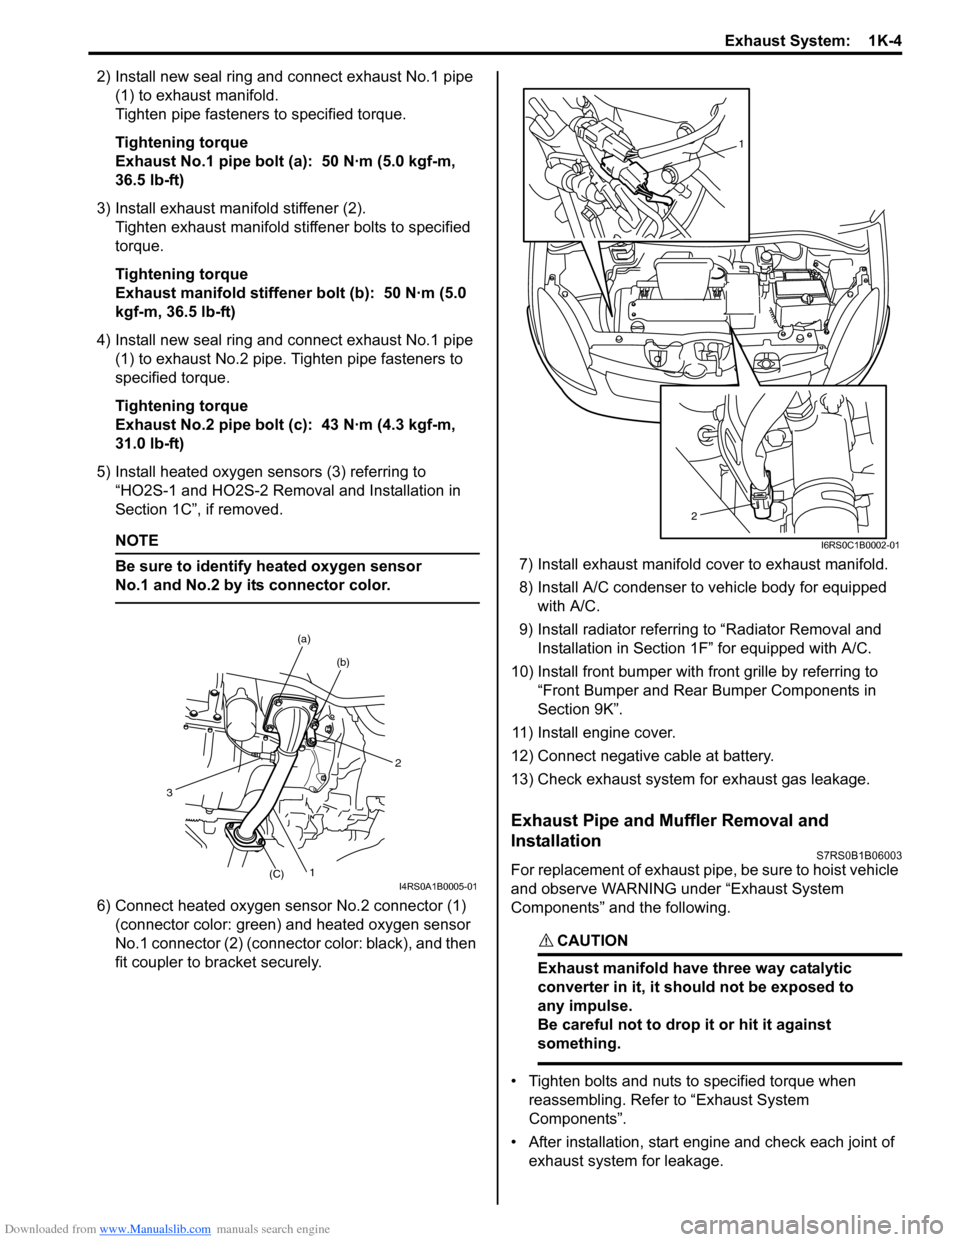 SUZUKI SWIFT 2008 2.G Service Workshop Manual Downloaded from www.Manualslib.com manuals search engine Exhaust System:  1K-4
2) Install new seal ring and connect exhaust No.1 pipe (1) to exhaust manifold.
Tighten pipe fasteners to specified torqu